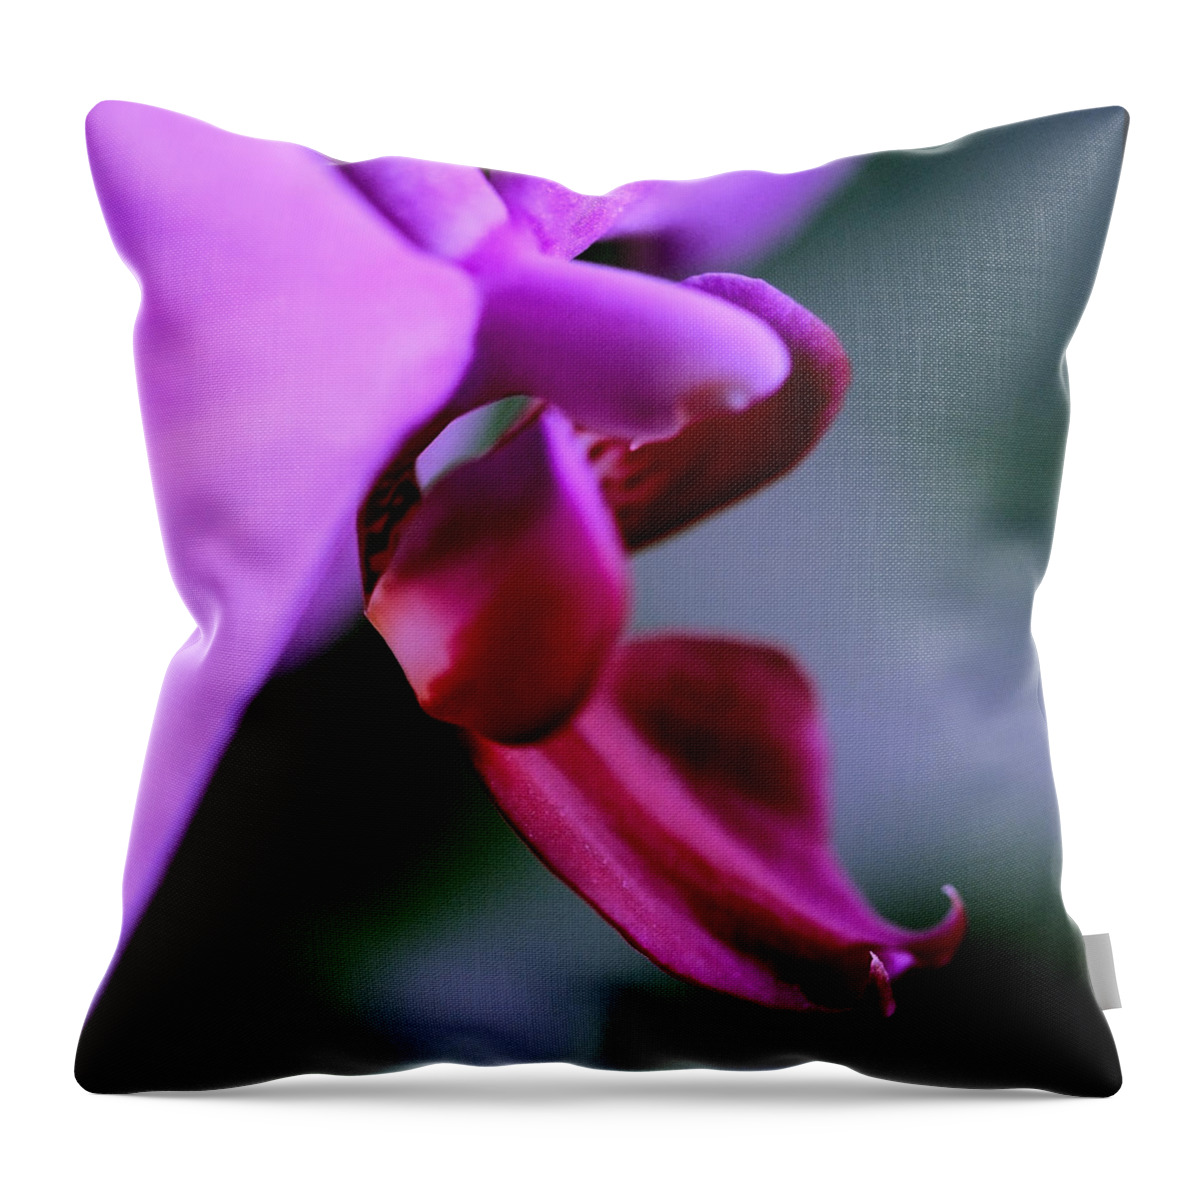 Flower Throw Pillow featuring the digital art Orchid Jewel by Sherry Hallemeier